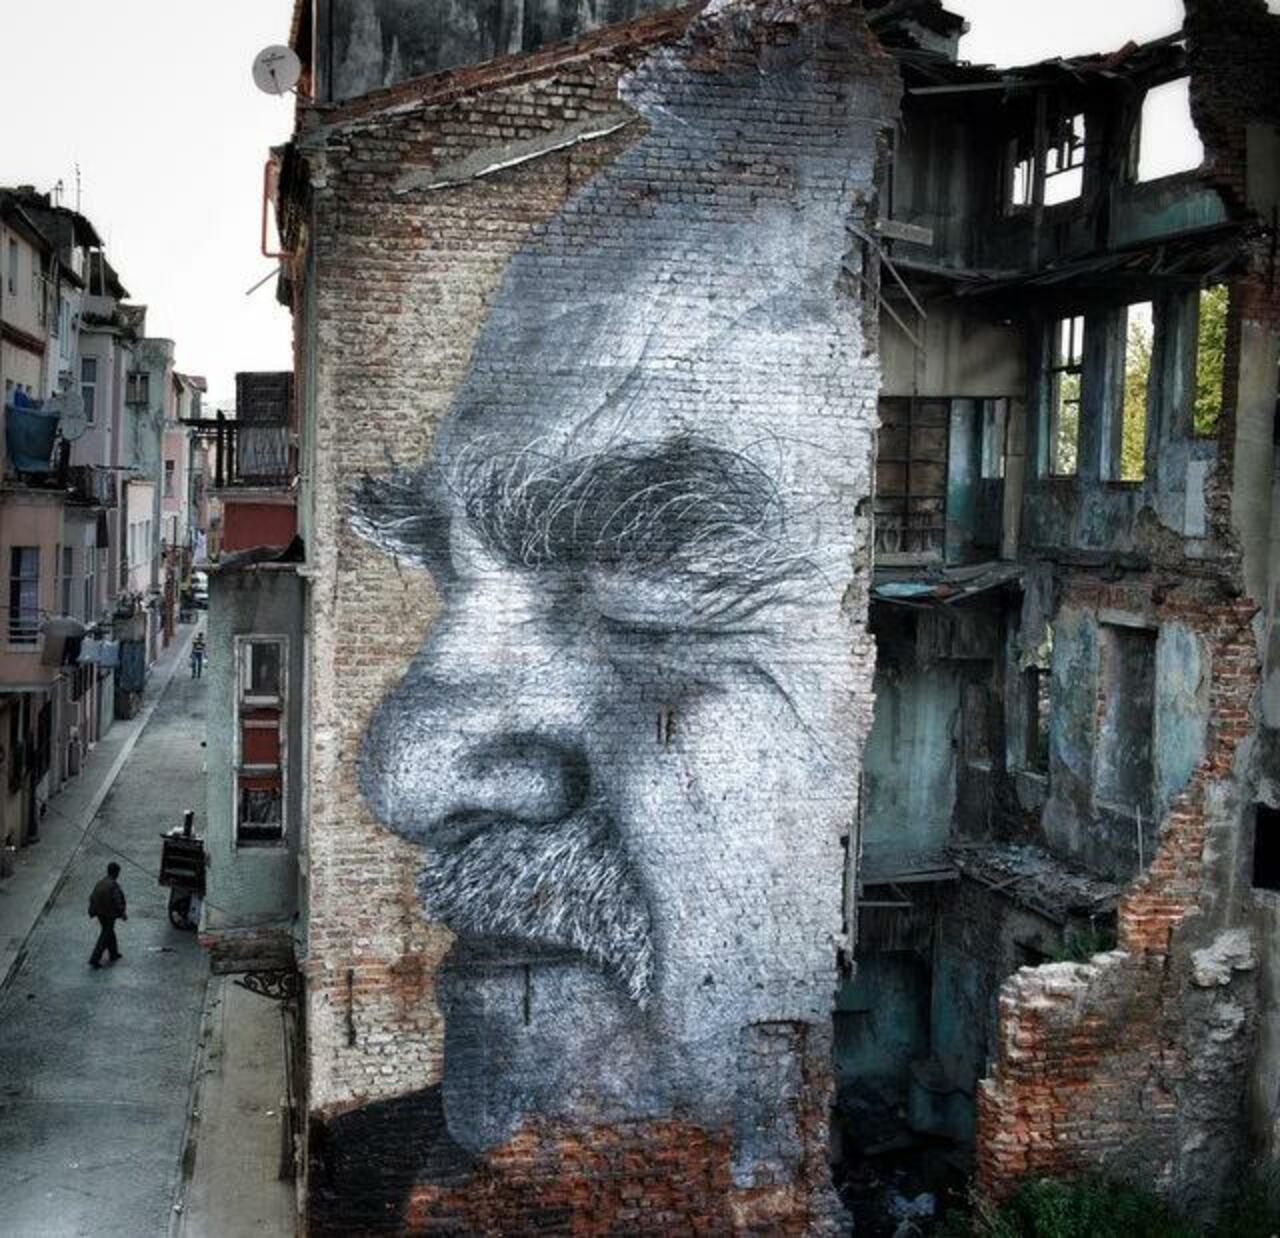 Street Art by JR in Istanbul & after local police painted over it 

#art #arte #graffiti #streetart http://t.co/gqljH6ETdH